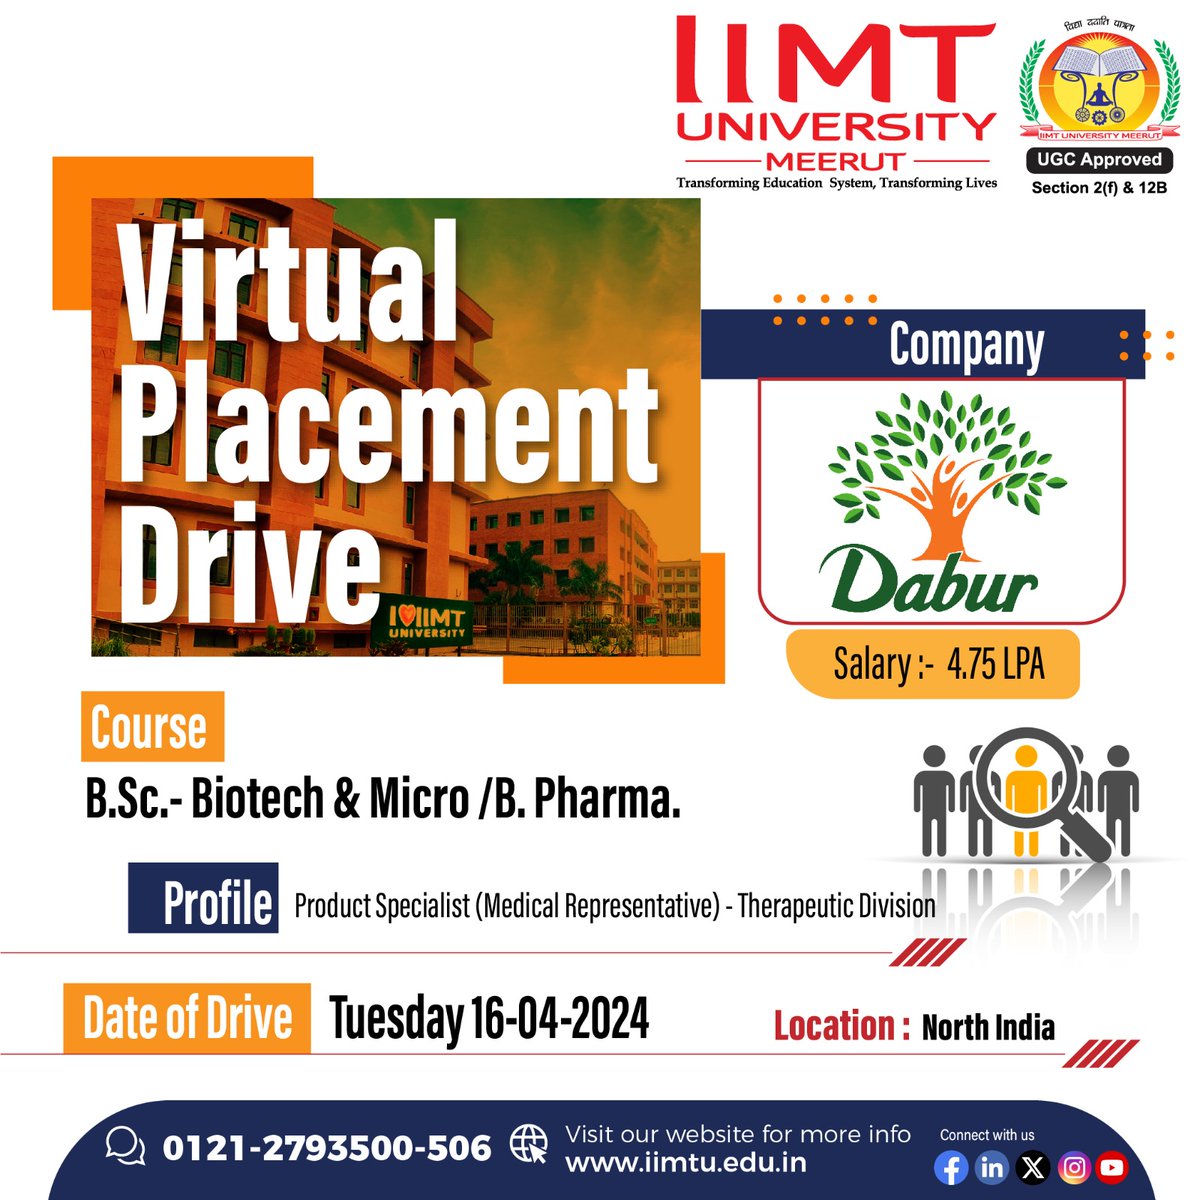 📢 Virtual #PlacementDrive Announcement 
🏢 #Company: @DaburIndia Limited
📅 Date: Tuesday, 16-04-2024
💼 Job Role: Product Specialist (Therapeutic Division)    
📋 Eligibility:  B. Sc. -Biotech & Micro /B. Pharma 
⏰ Timing: 2:00 PM Onwards     

#DaburIndia #Hiring #placements